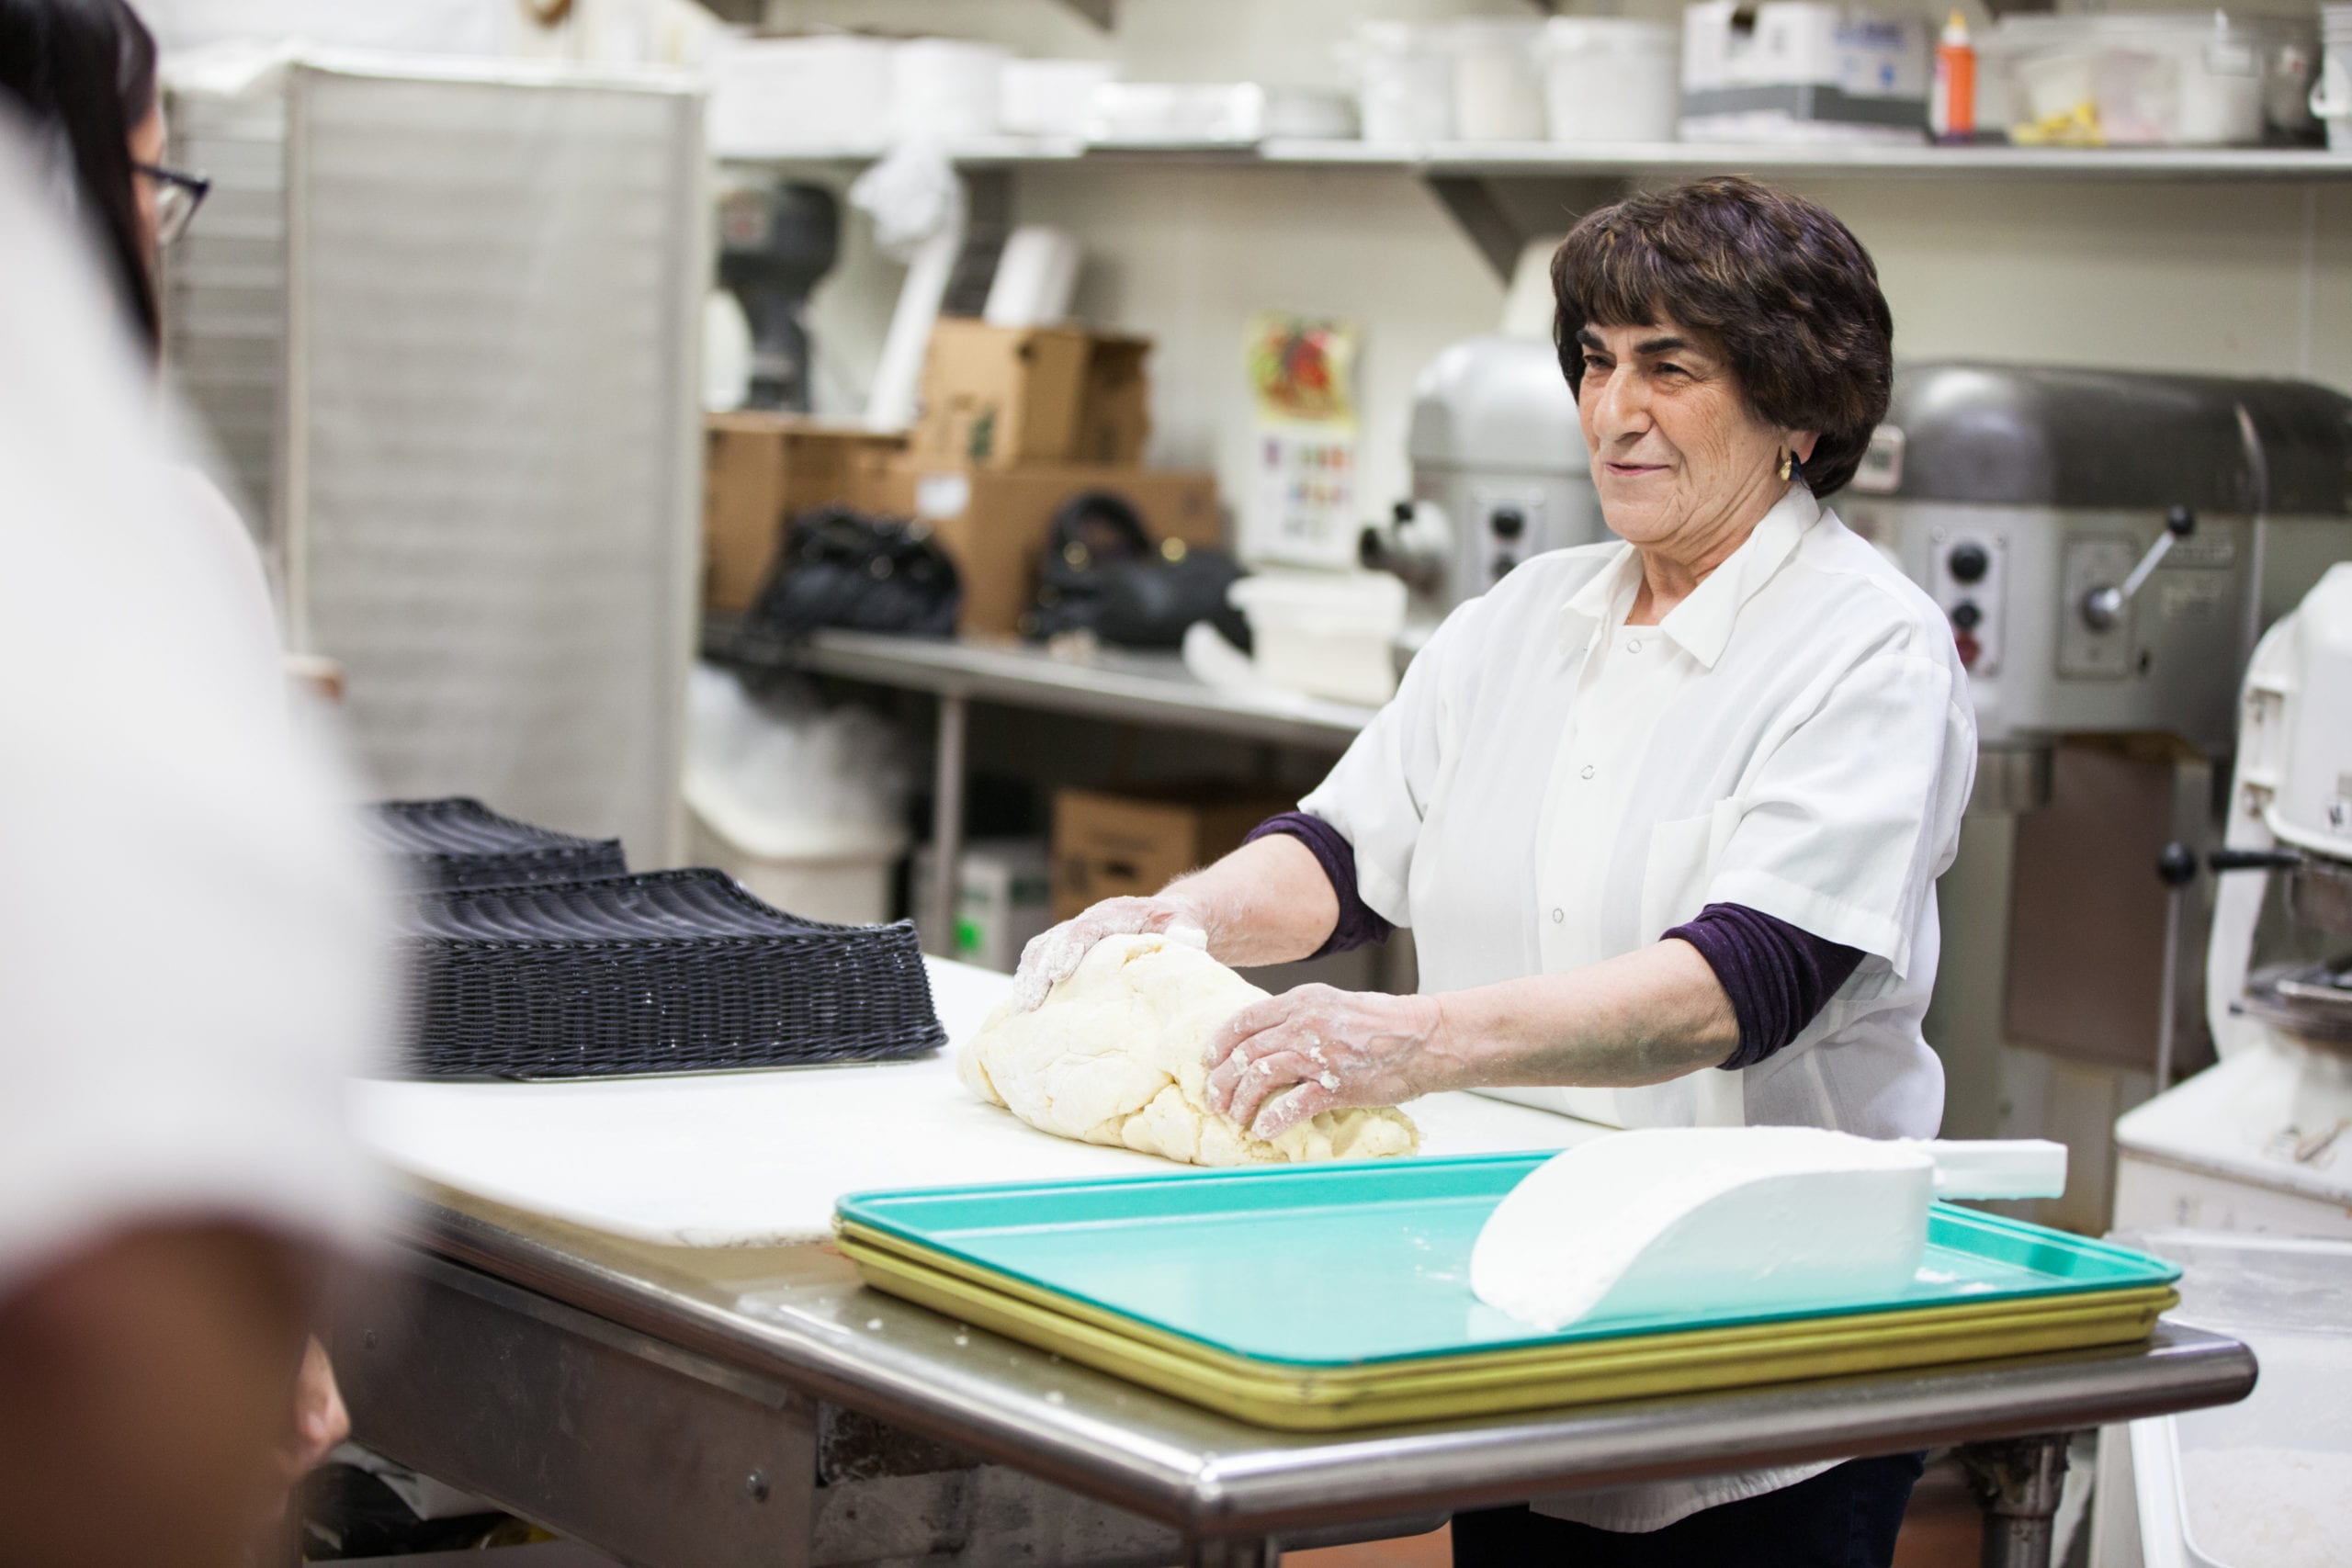 A woman standing at a table rolling dough